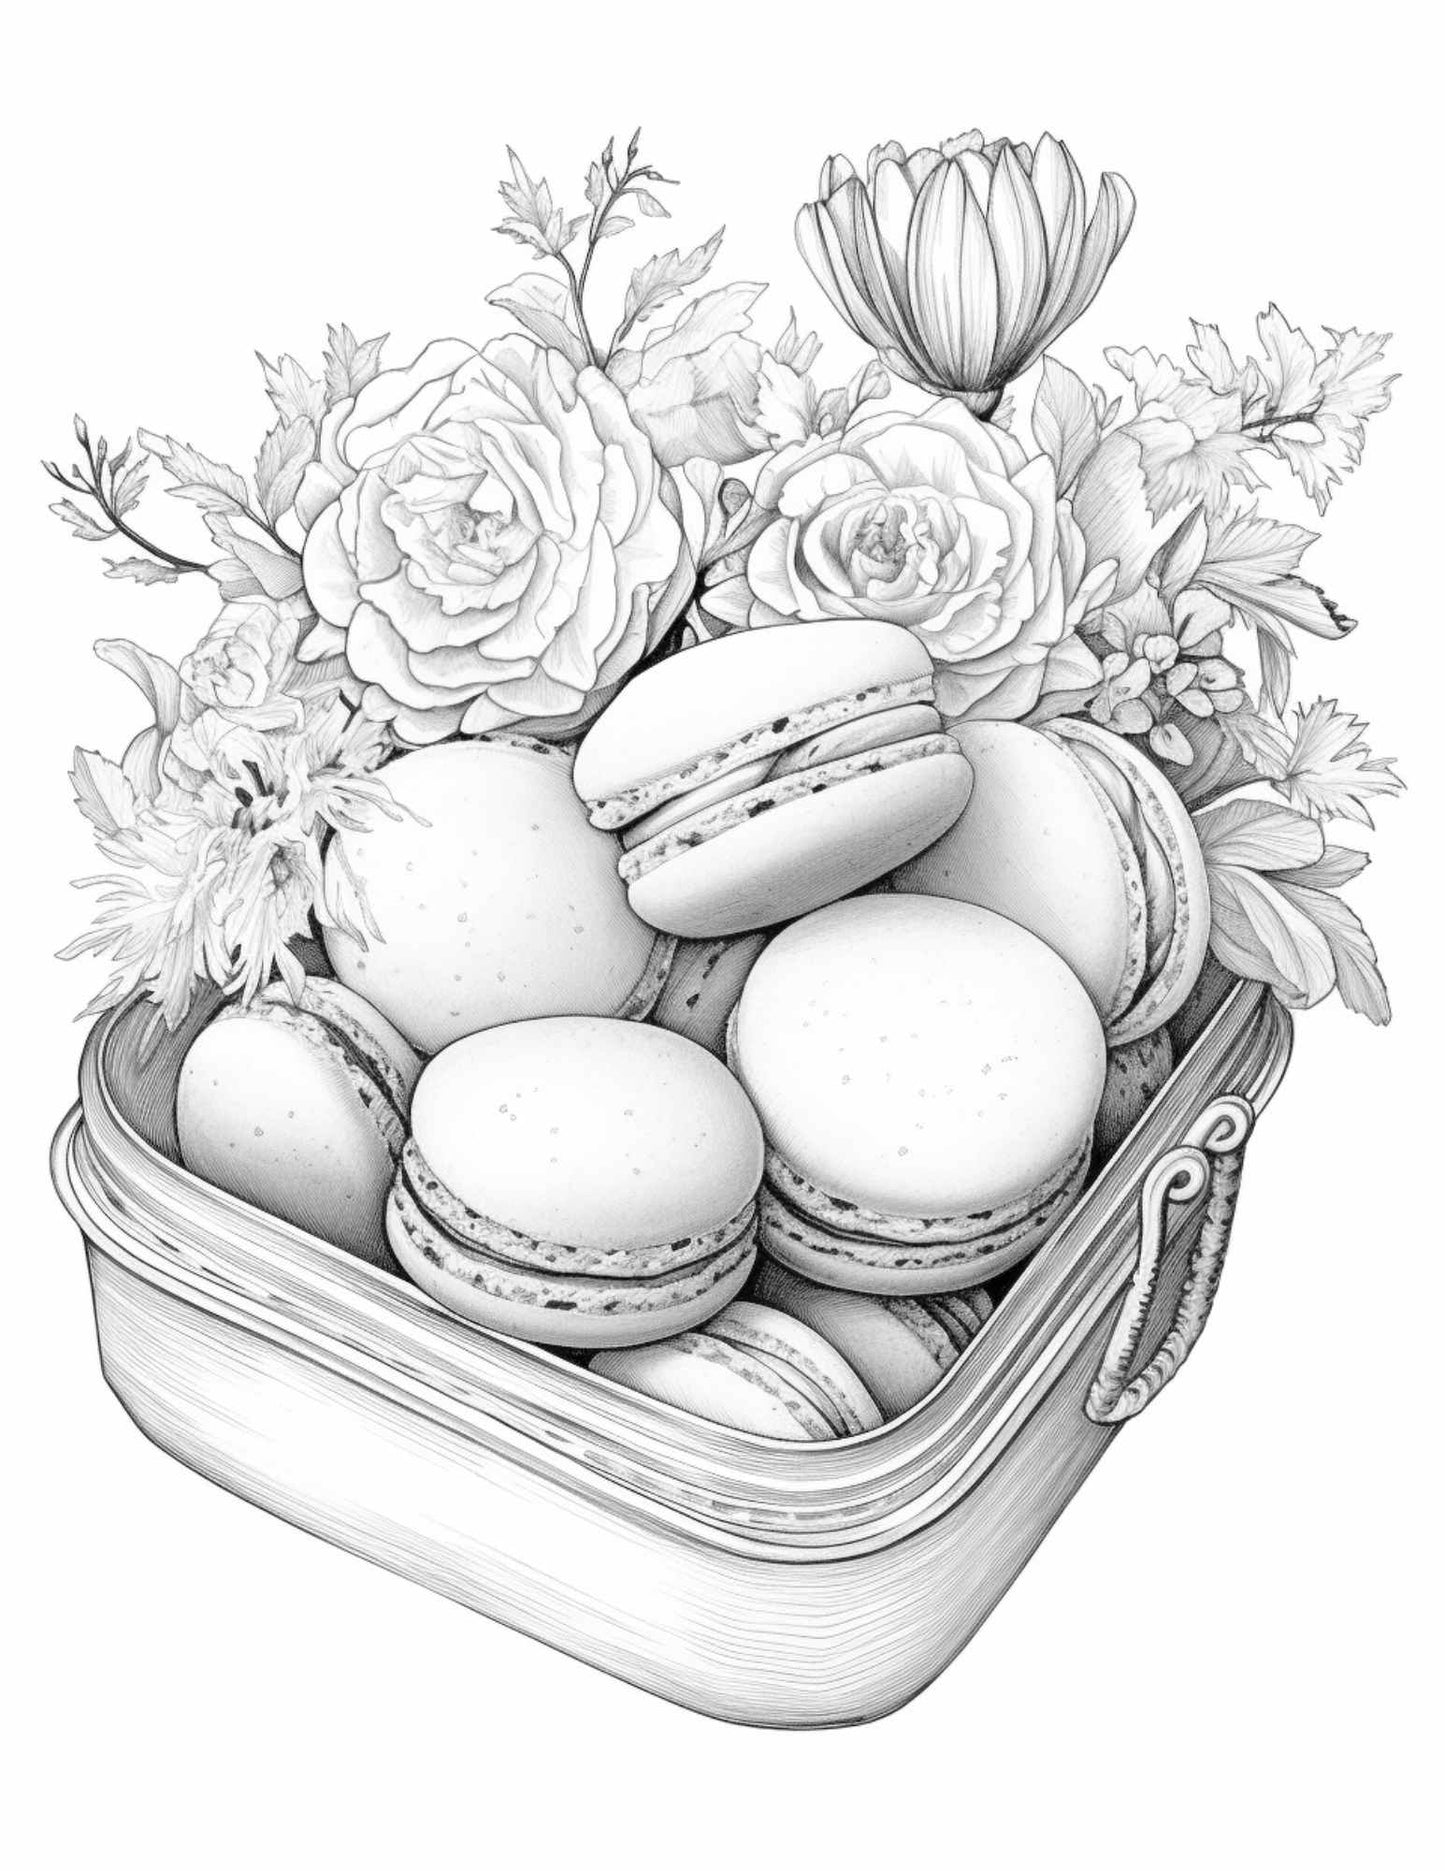 vintage macarons grayscale coloring pages, printable coloring pages for adults, free coloring pages, grayscale art, macarons coloring